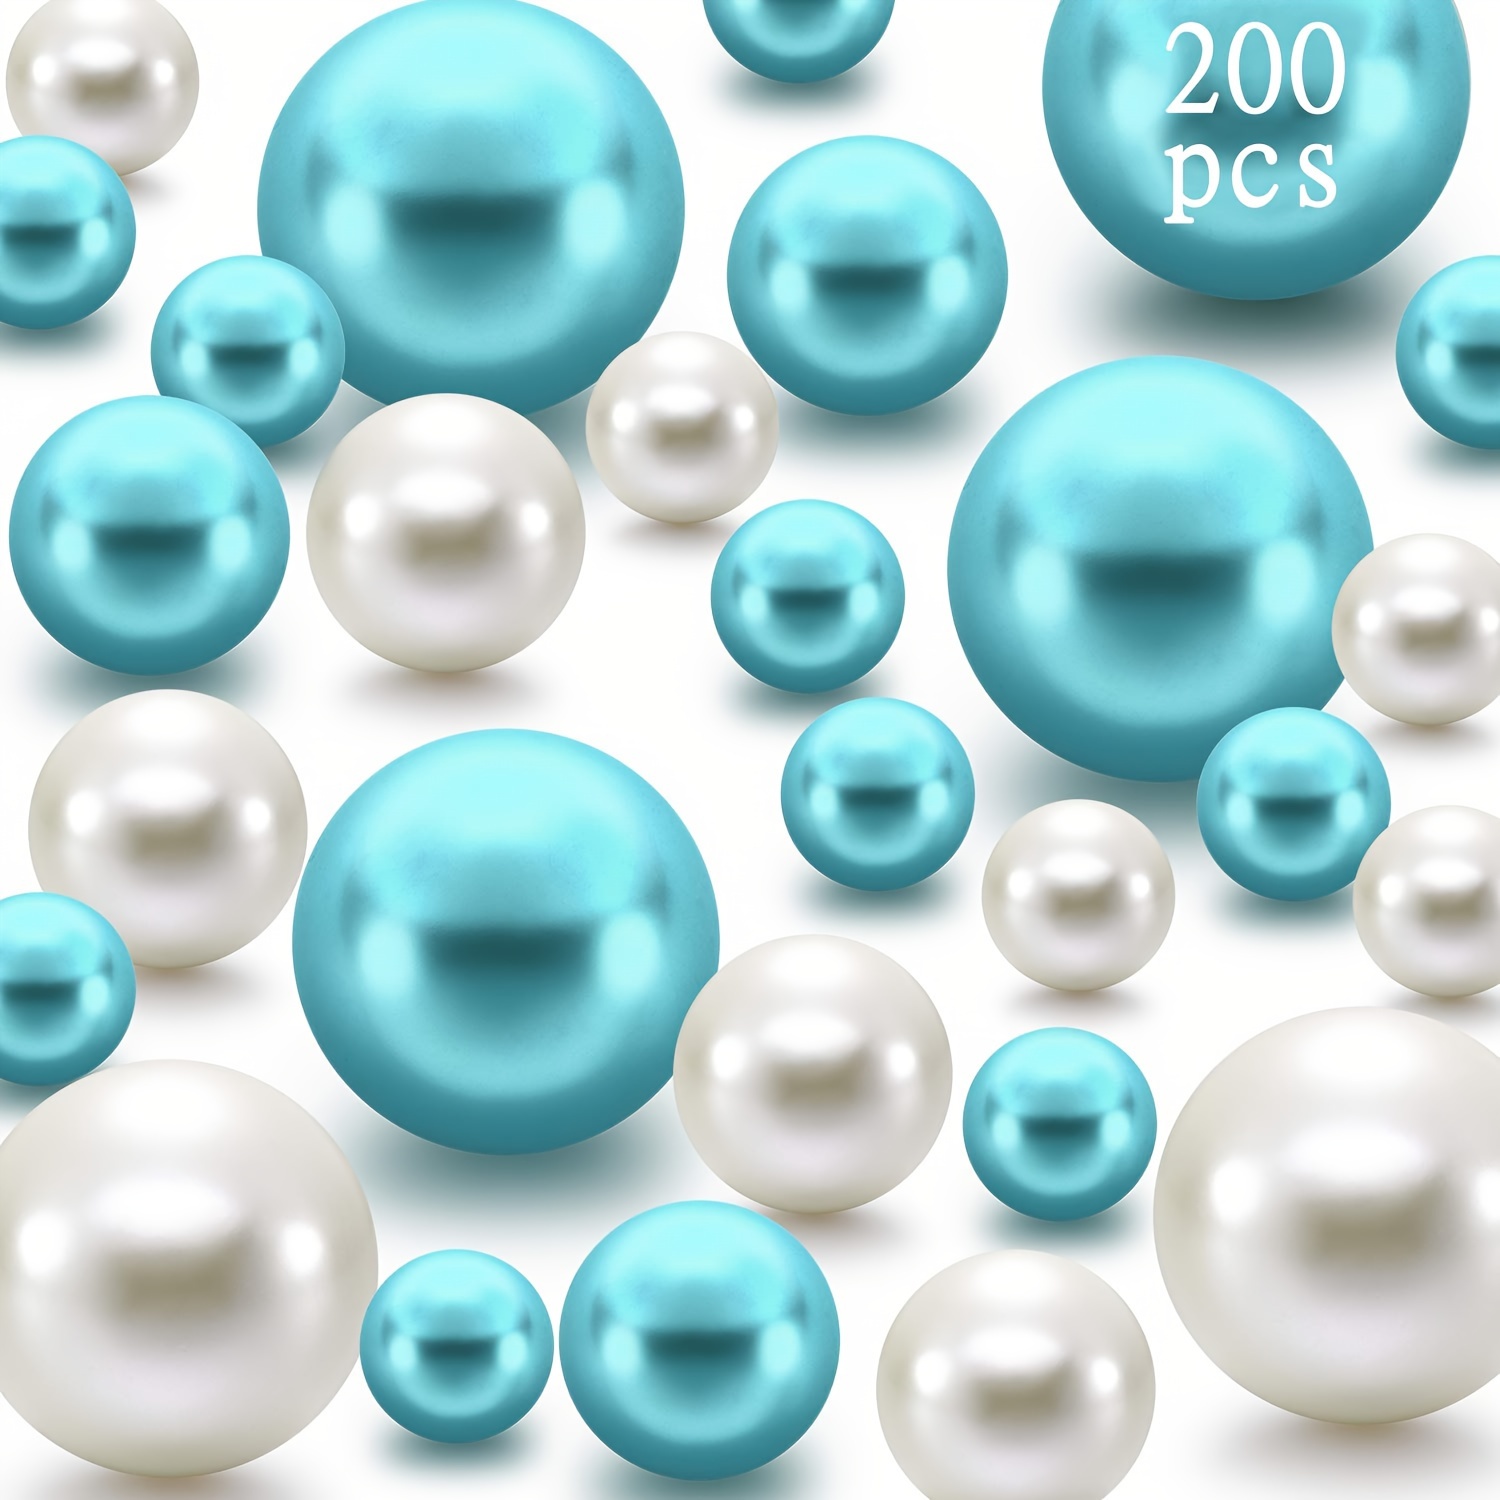 

200pcs Pearl For Vase Filler Pearl Bead Vase Centerpieces Bead For Brush Holder Assorted Round Faux Bead For Home Wedding Table Decor, 10/20 Mm (creamy White, Turquoise)